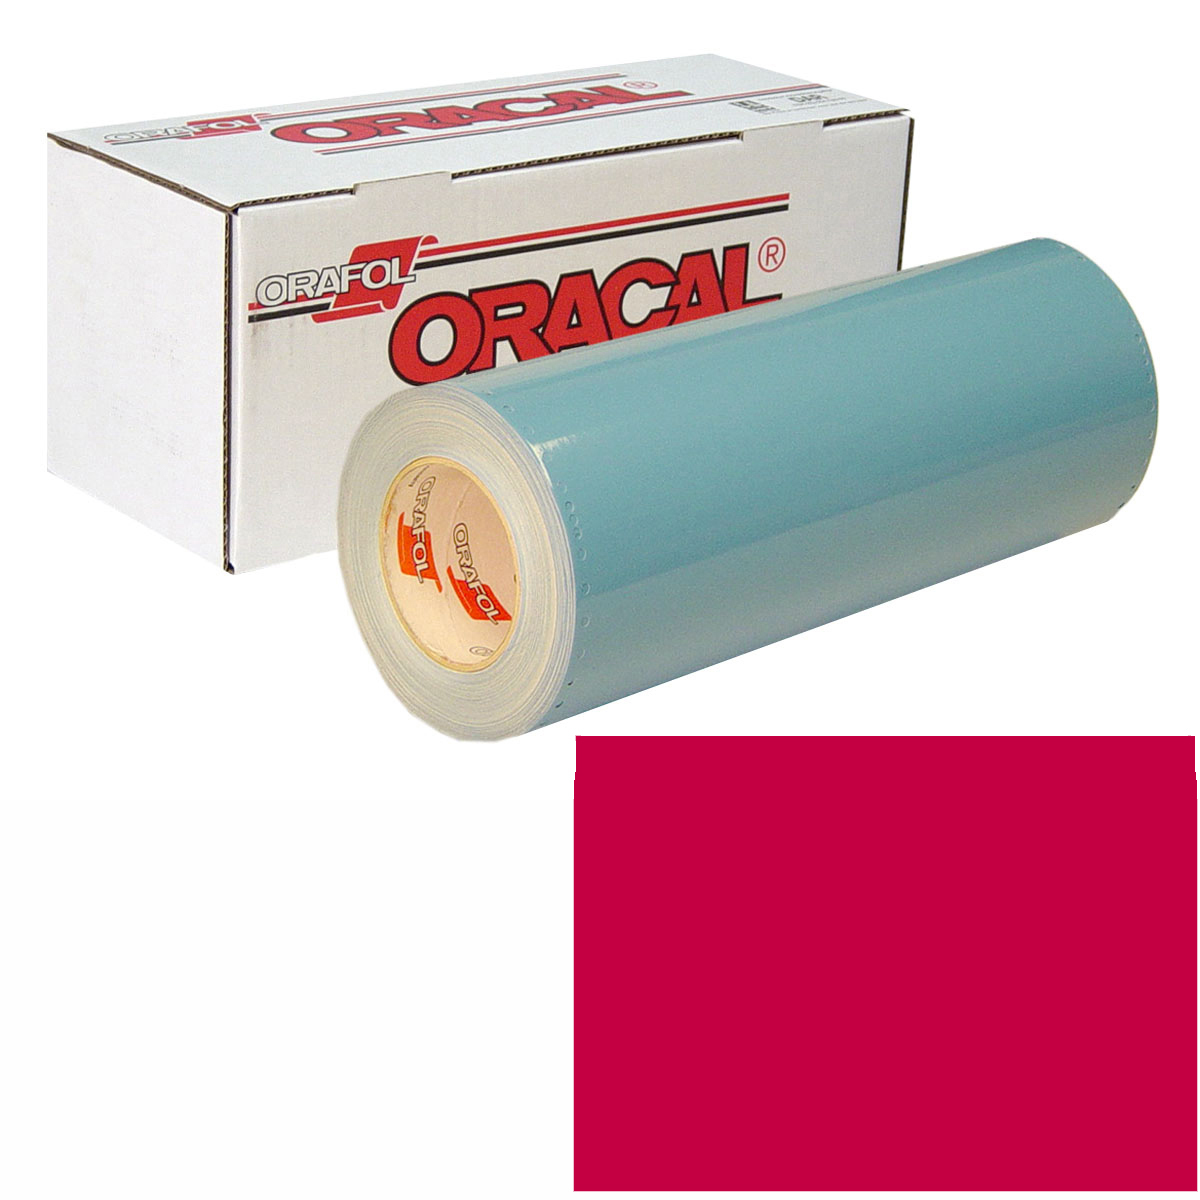 ORACAL 751 30in X 50yd 031 Red